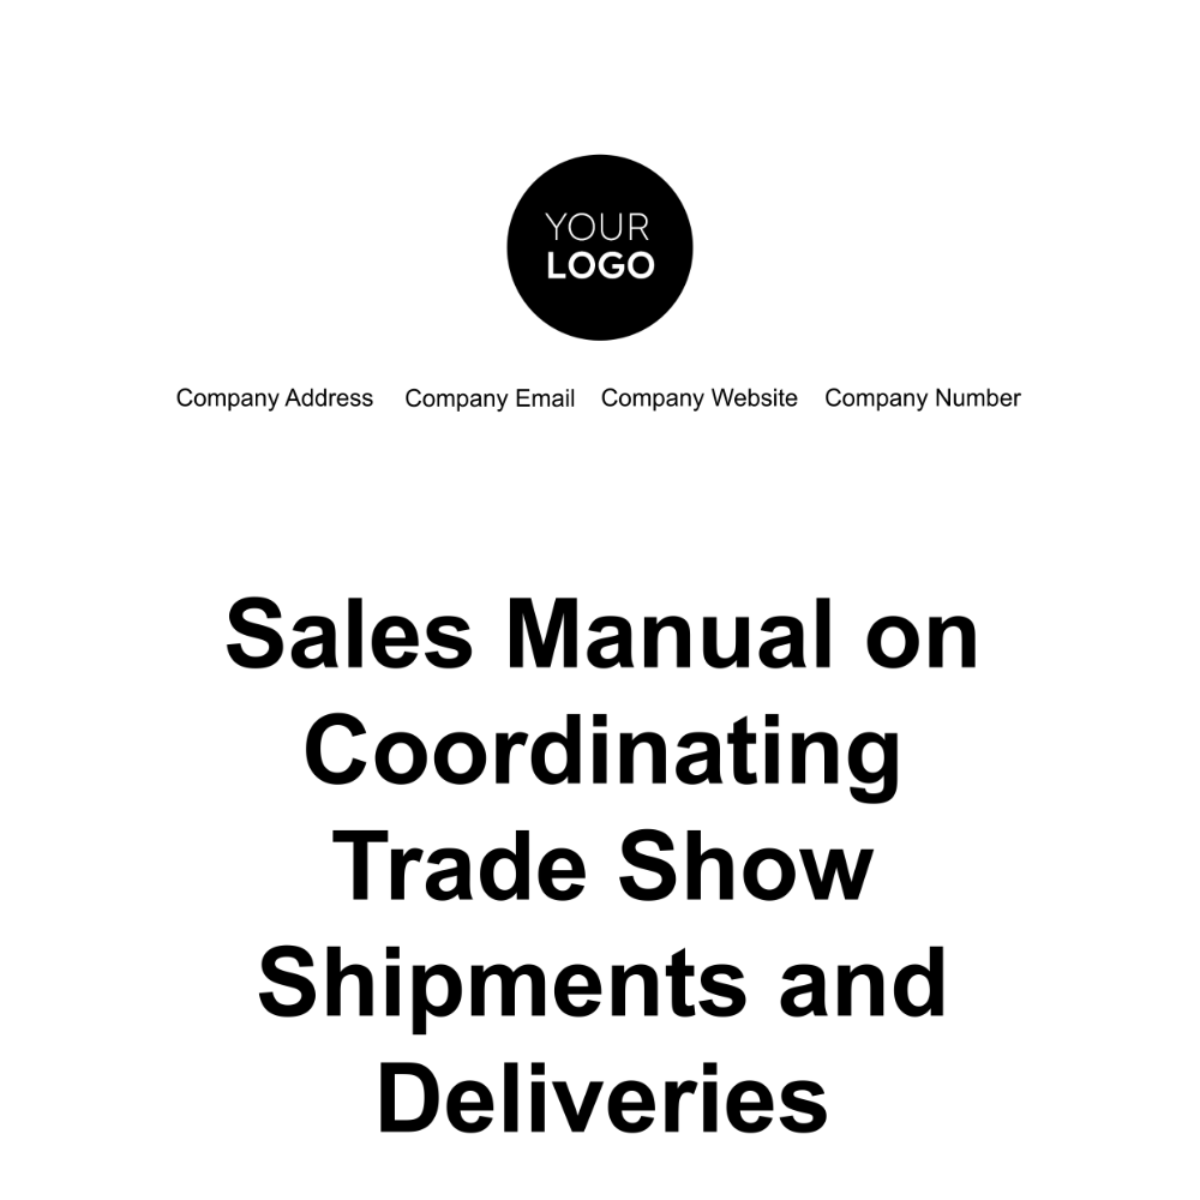 Sales Manual on Coordinating Trade Show Shipments and Deliveries Template